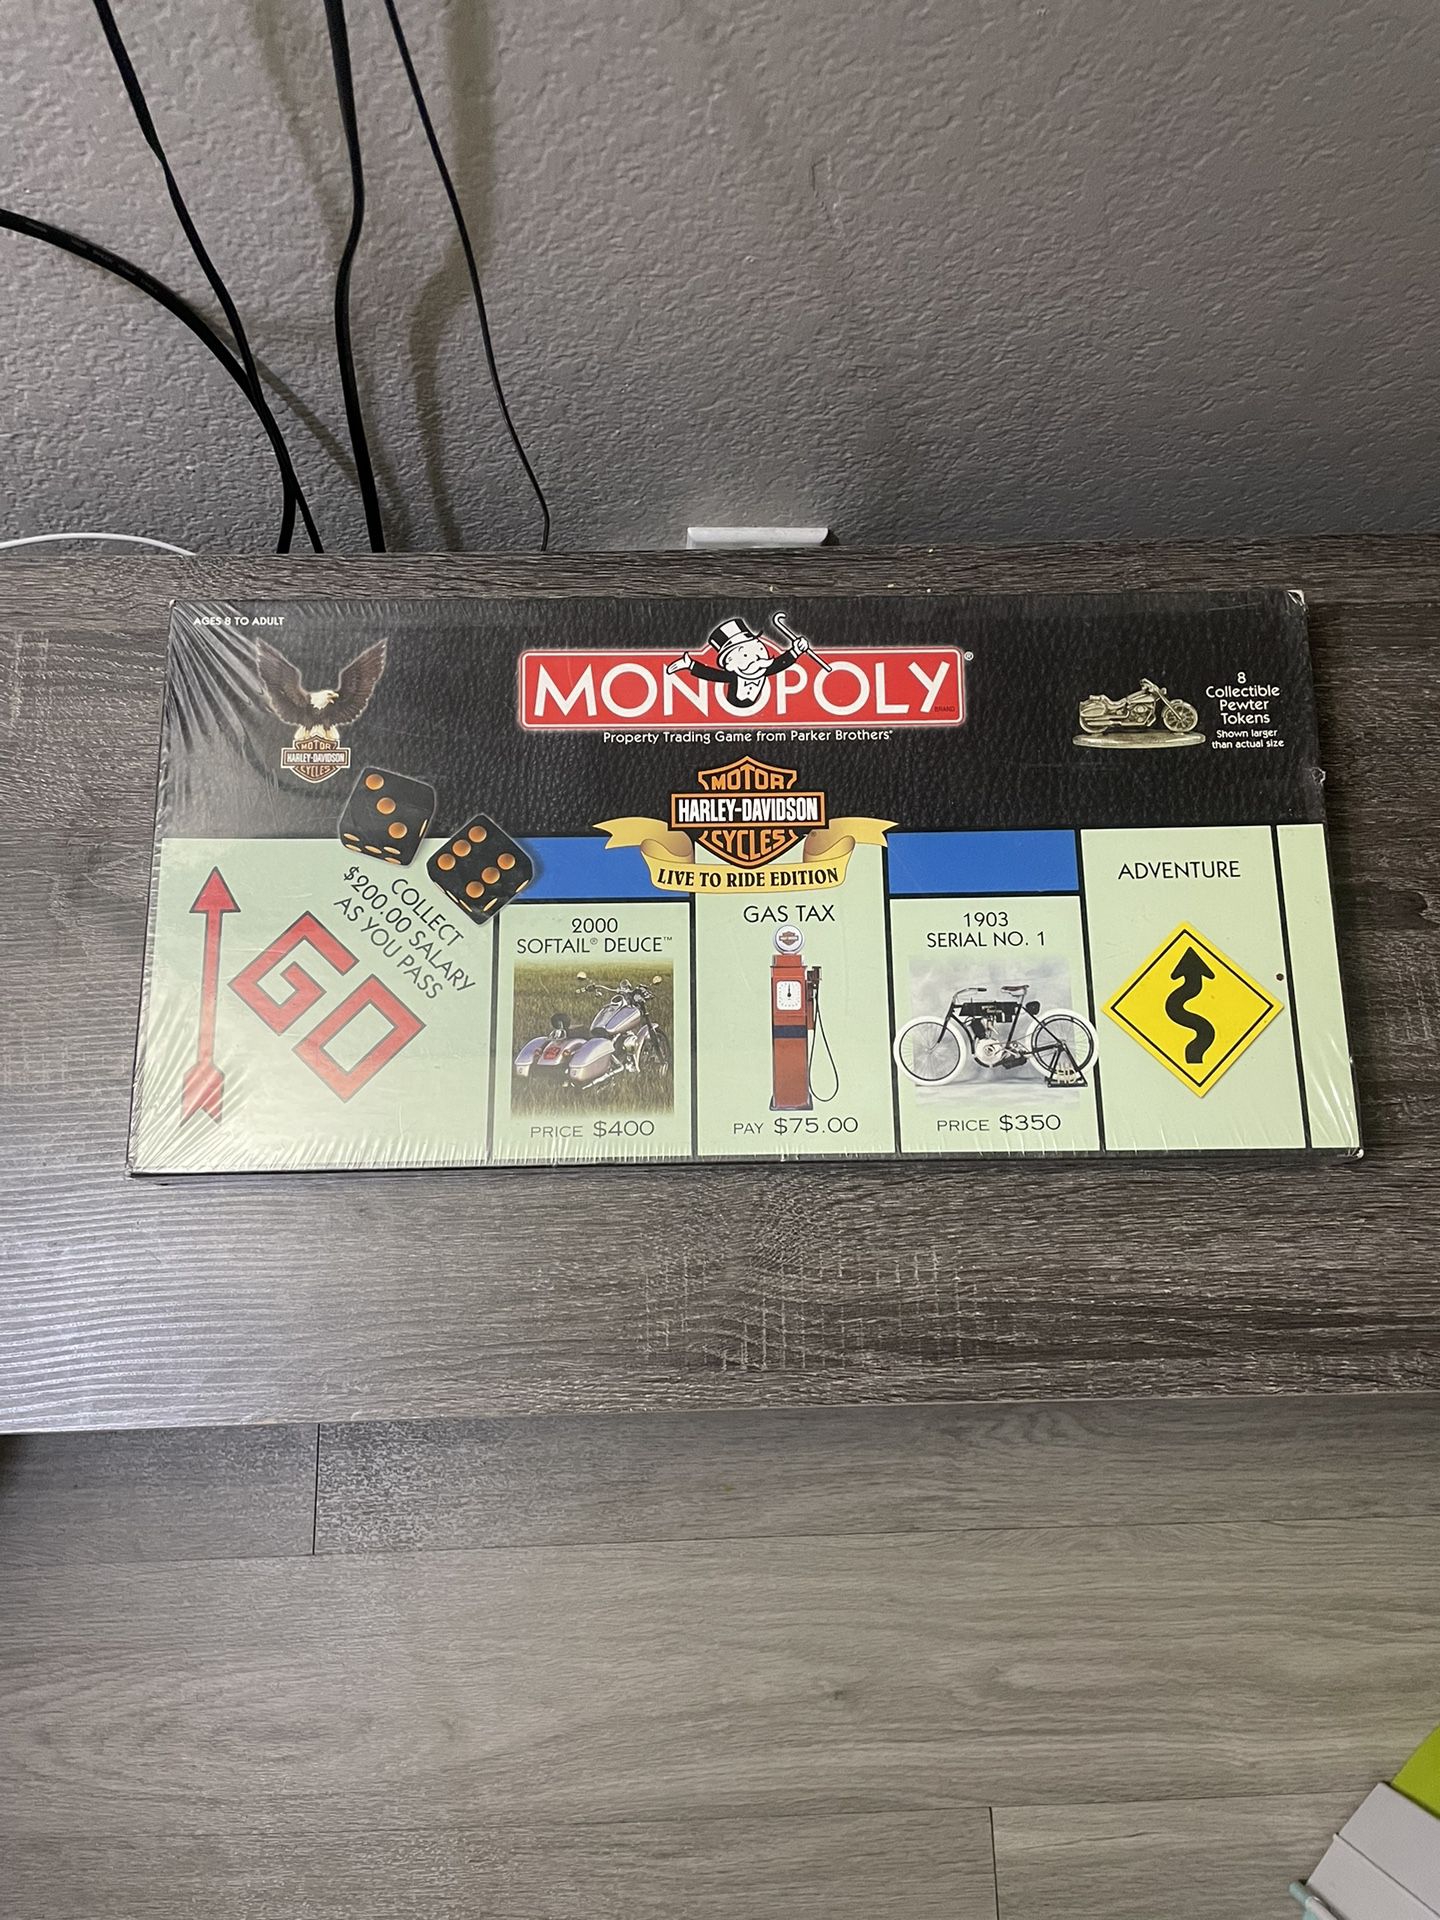 Monopoly HARLEY DAVIDSON Motorcycle Live to Ride Edition Parker Bros Complete